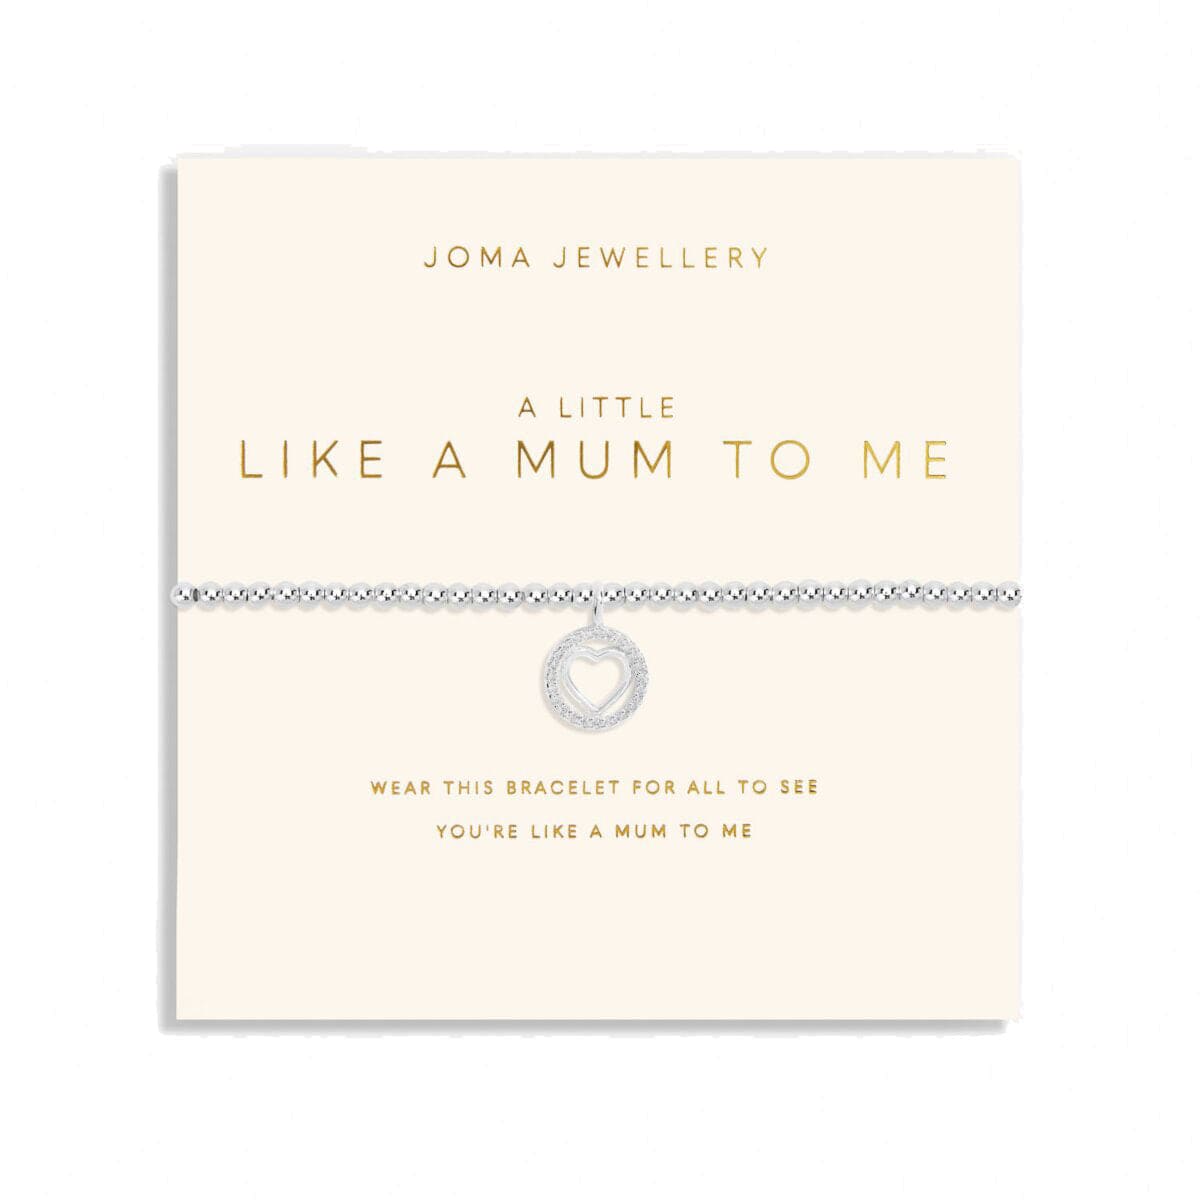 Joma Jewellery Bracelets Joma Jewellery Bracelet - A little Like a Mum to Me